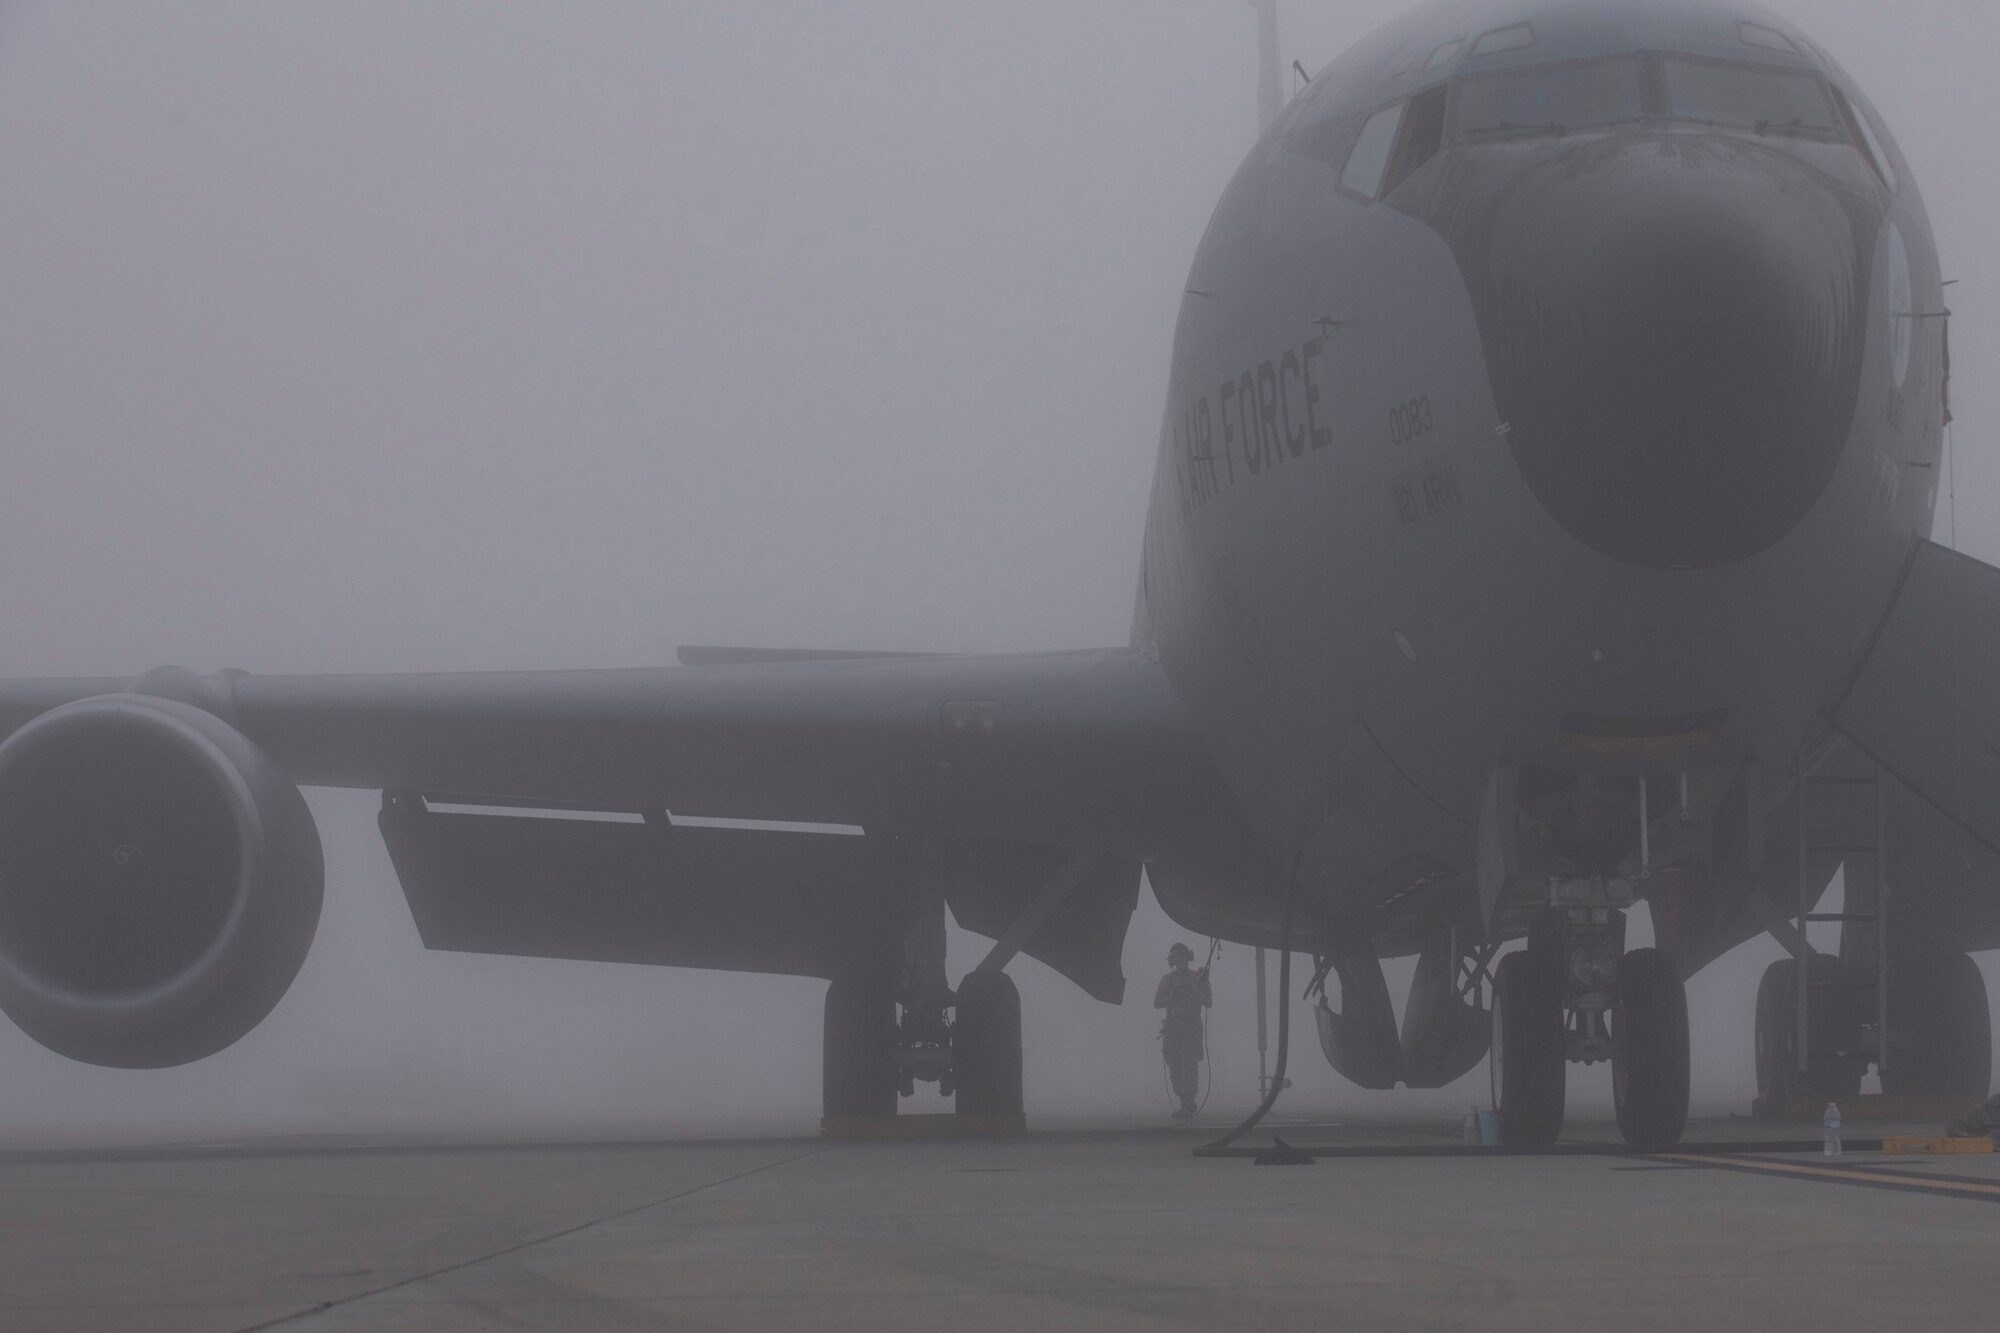 Airmen with the 121st Air Refueling Wing, work on a KC-135 Stratotanker in thick fog at Rickenbacker Air National Guard Base, Ohio, Aug. 3, 2018. Airmen stayed visible during the inclement weather by wearing their reflective belts. (U.S. Air National Guard photo by Airman 1st Class Tiffany A. Emery)